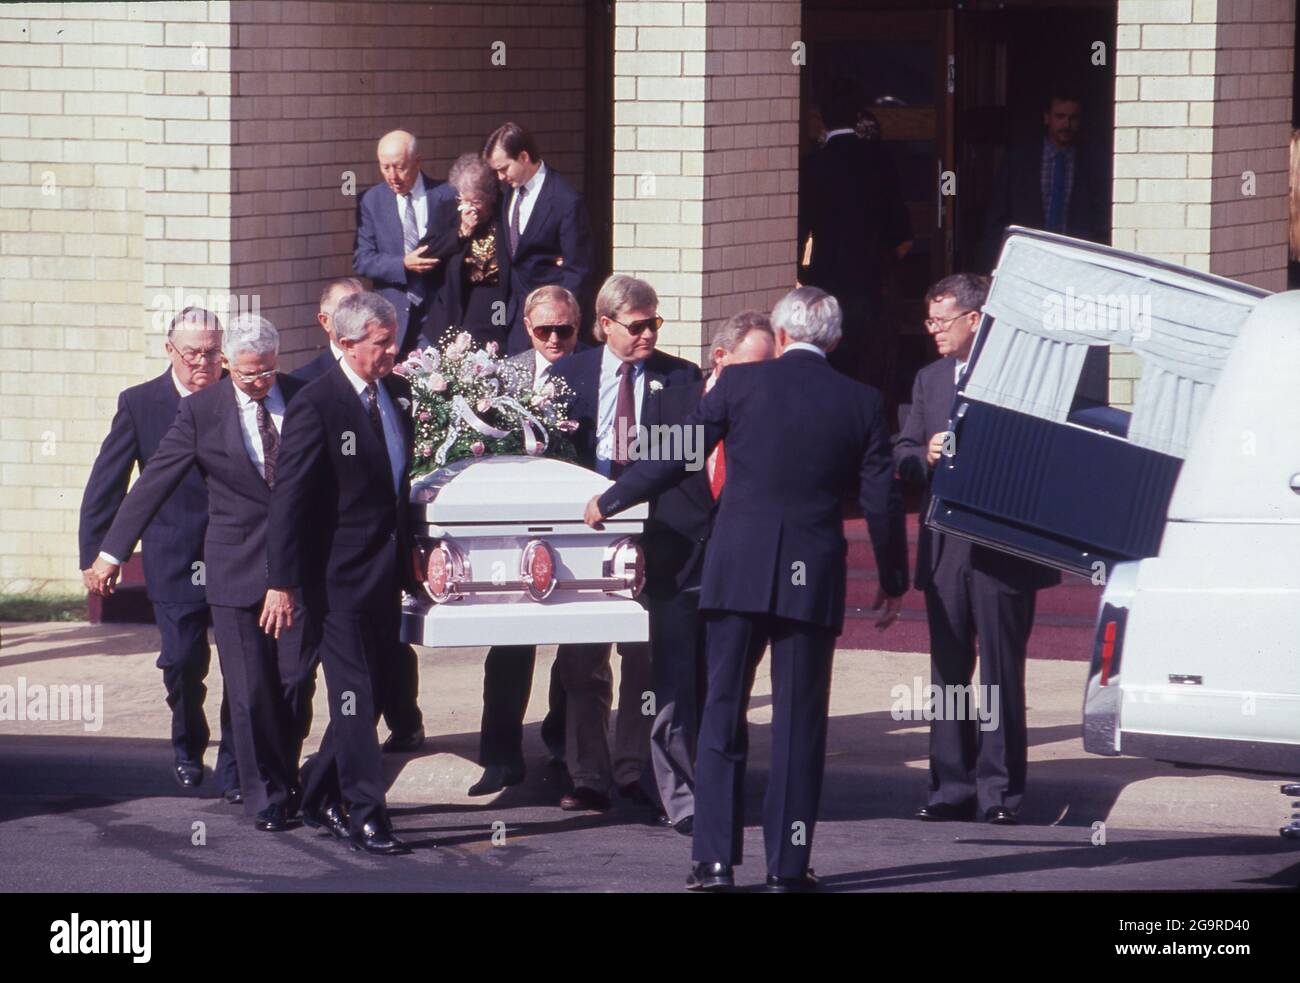 Killeen Texas USA, October 1991: Mourners attend a funeral service for one of the victims of a mass shooting at Luby's Cafeteria in Killeen. on October 16. George Hennard, a 35-year-old Killeen resident, crashed a pickup into the eatery and shot 23 people to death before killing himself. ©Bob Daemmrich Stock Photo